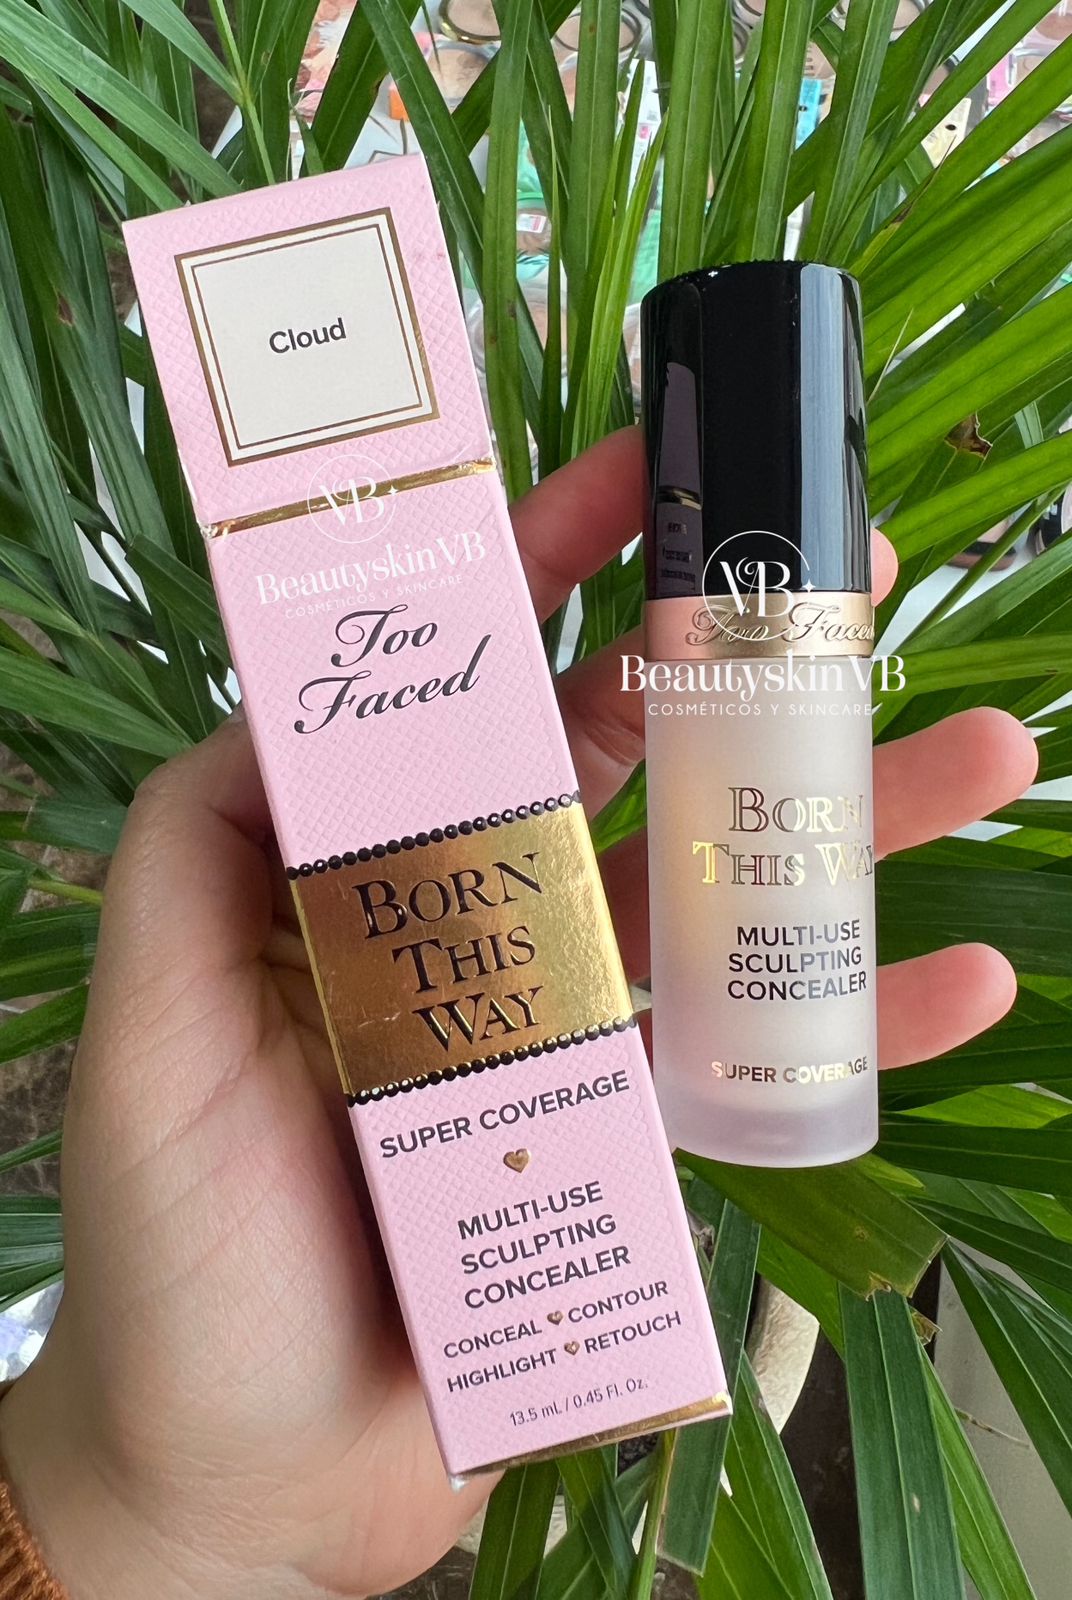 Too Faced | Born This Way| Super Coverage Multi-use Sculpting Concealer